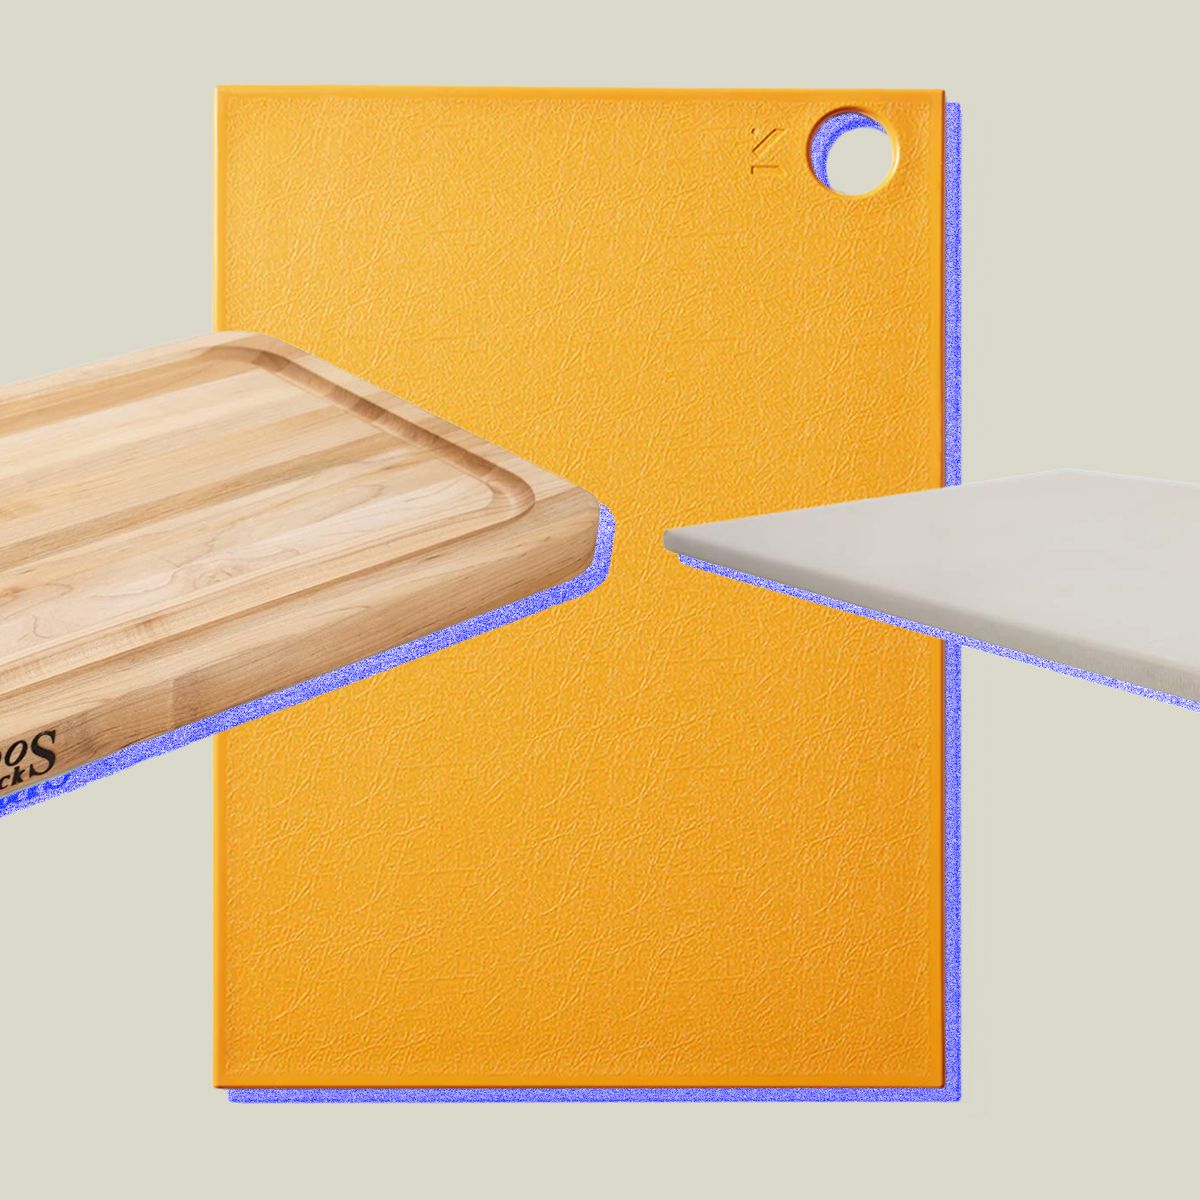 The 2 Best Plastic Cutting Boards of 2024, Tested and Reviewed